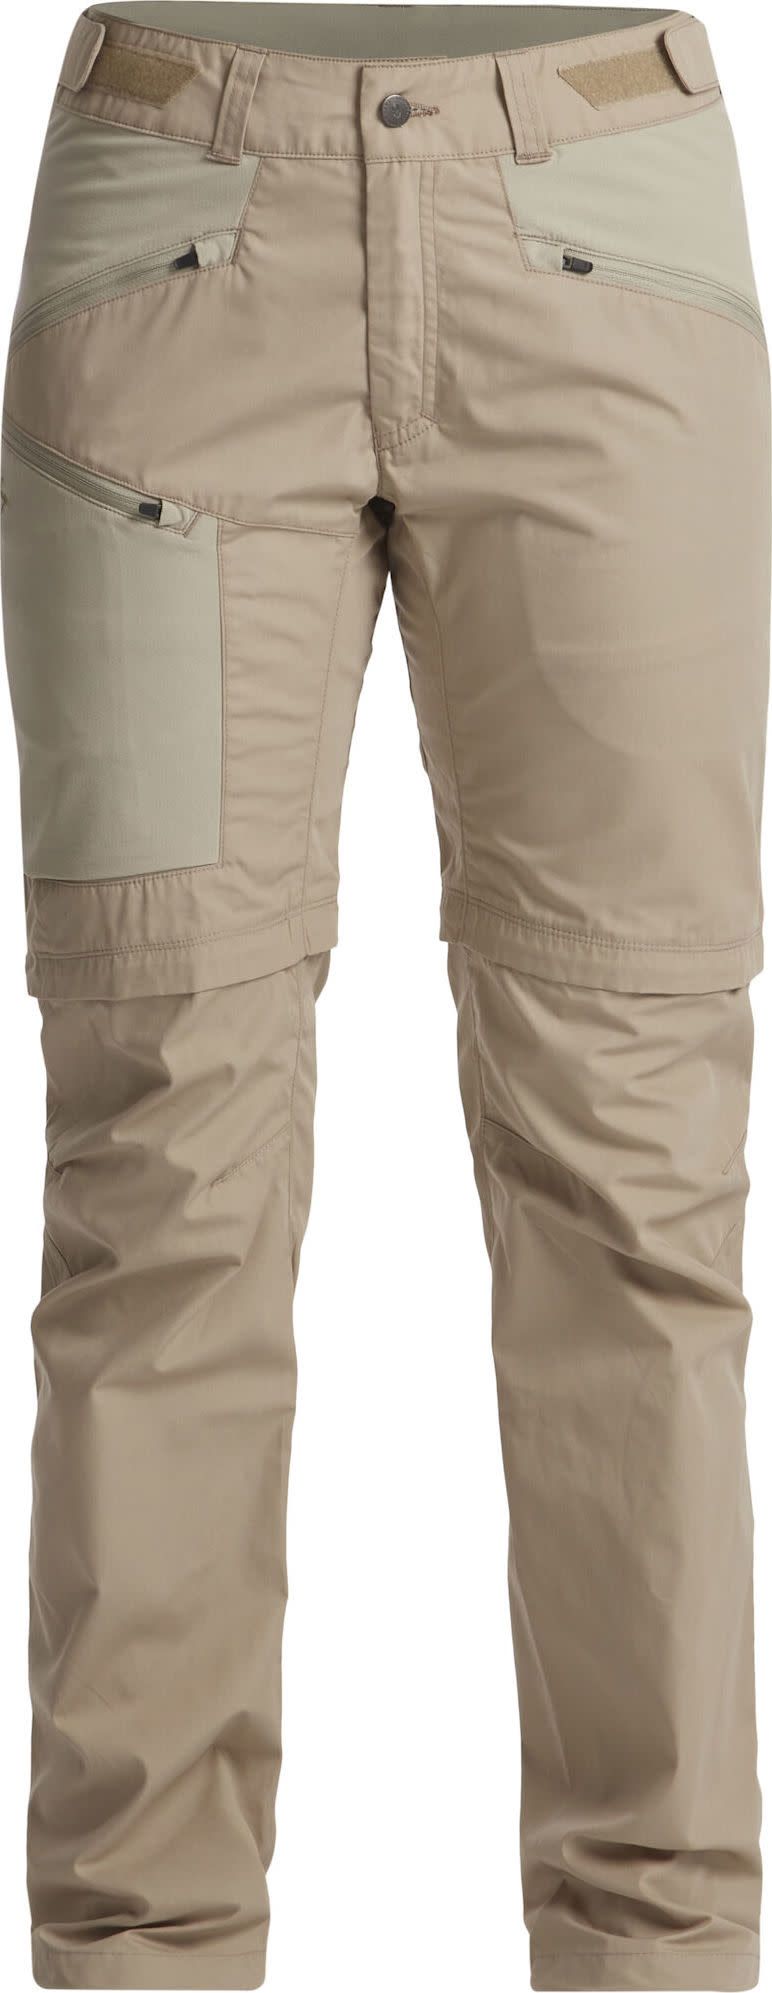 Women's Tived Zip-Off Pant  Sand